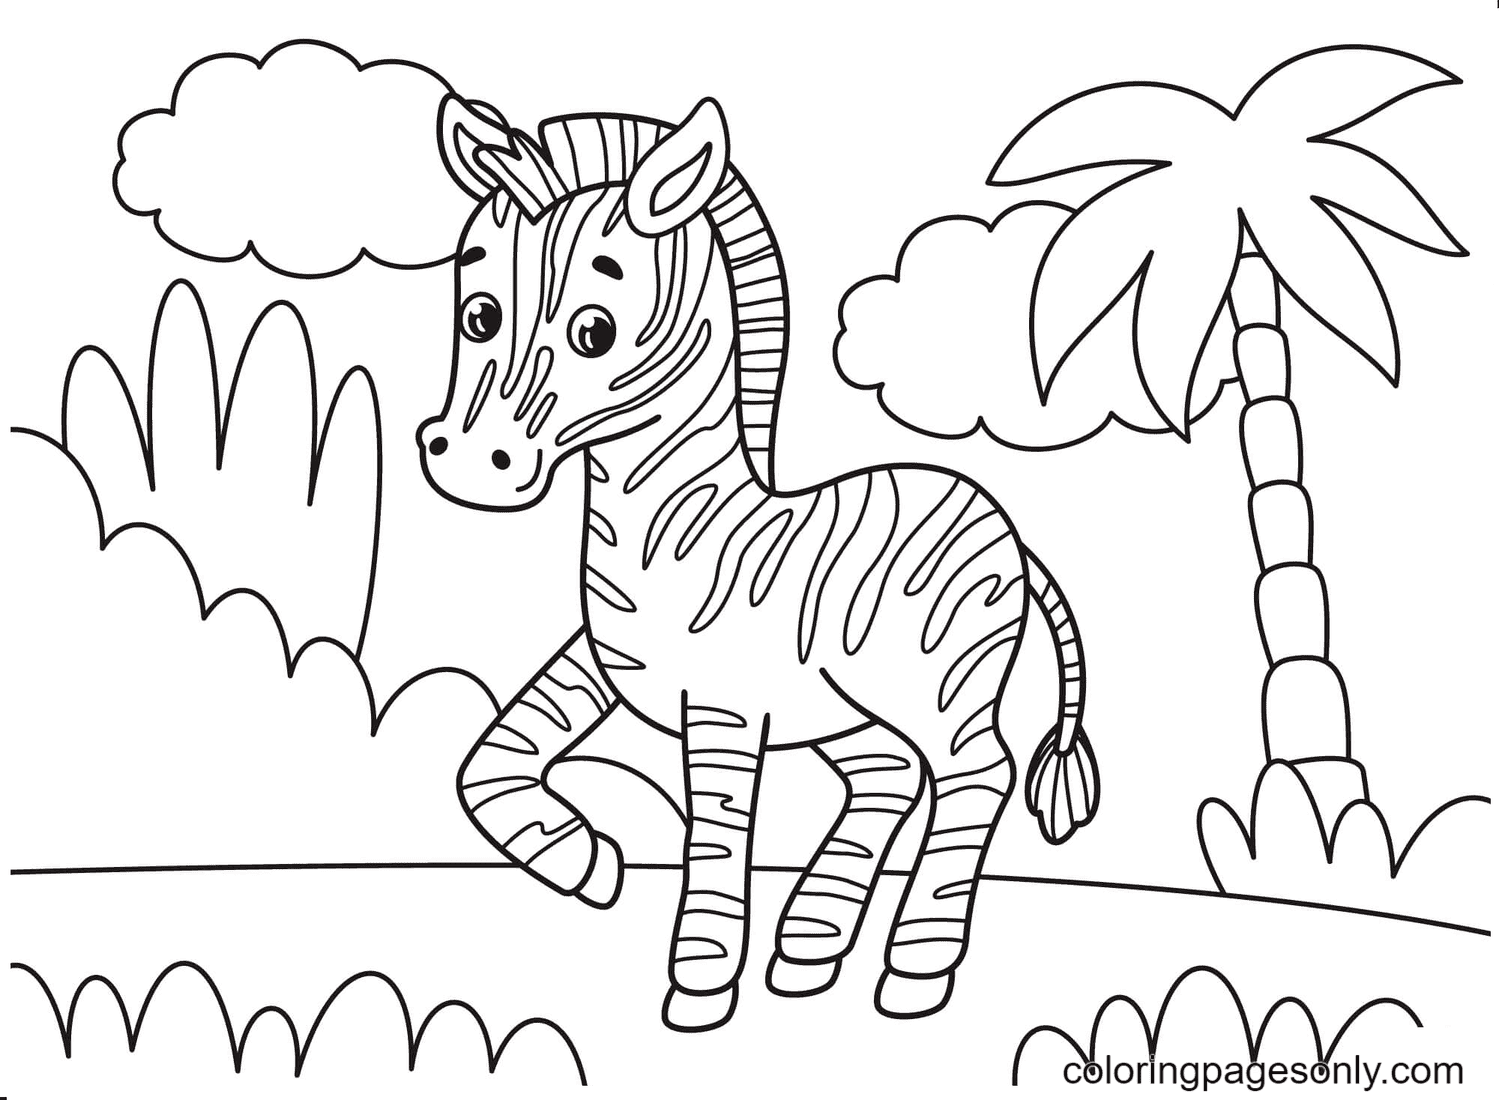 A Cute Zebra In The Forest Coloring Pages